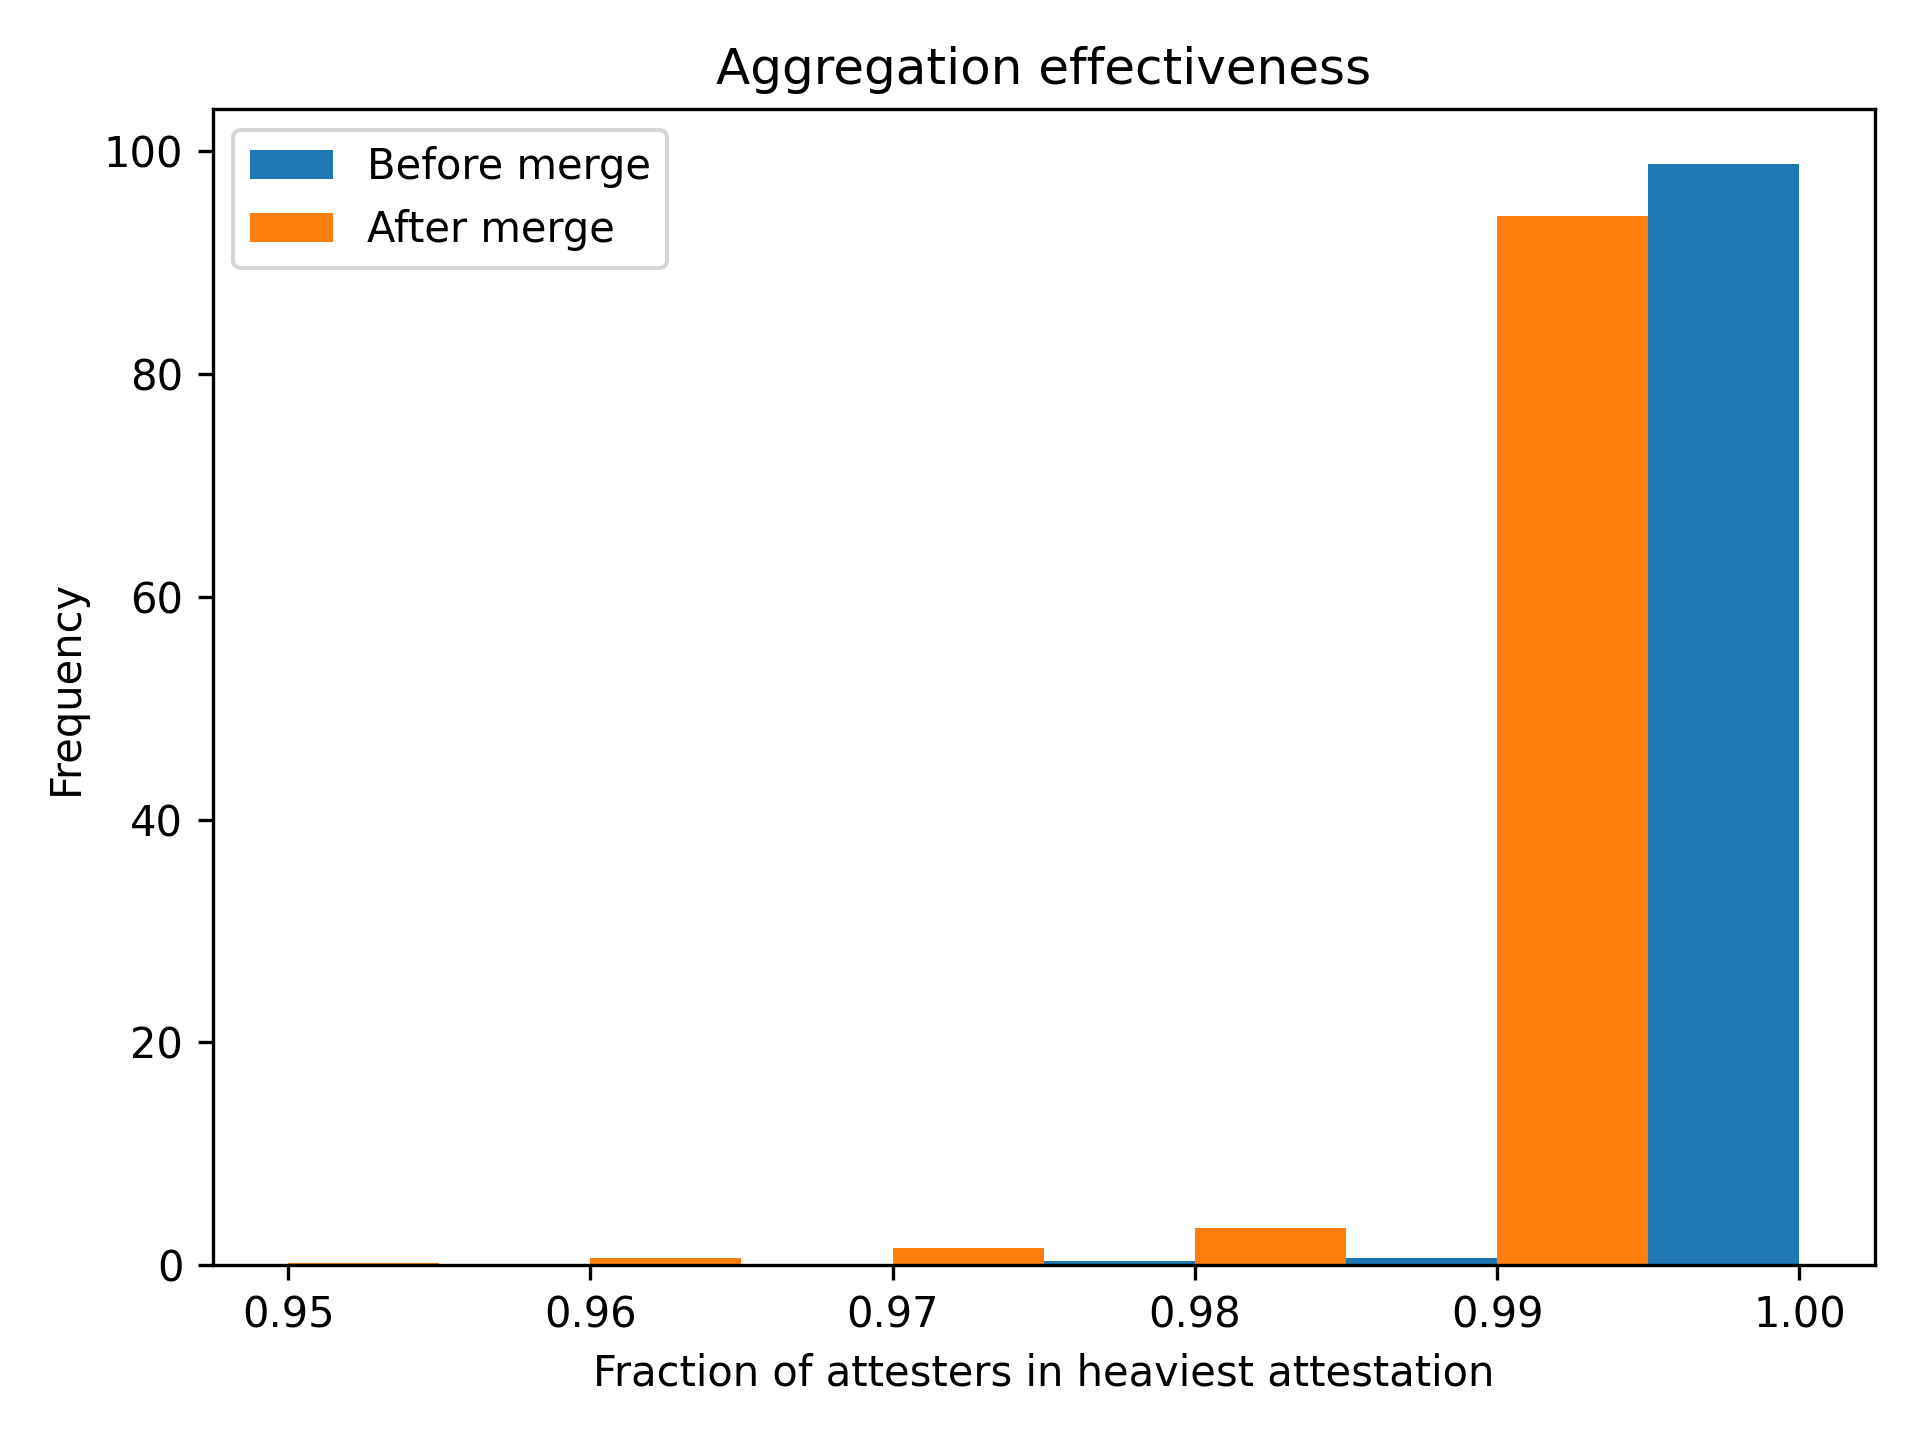 The effectiveness of aggregation measured as the relative weight of the heaviest attestation.